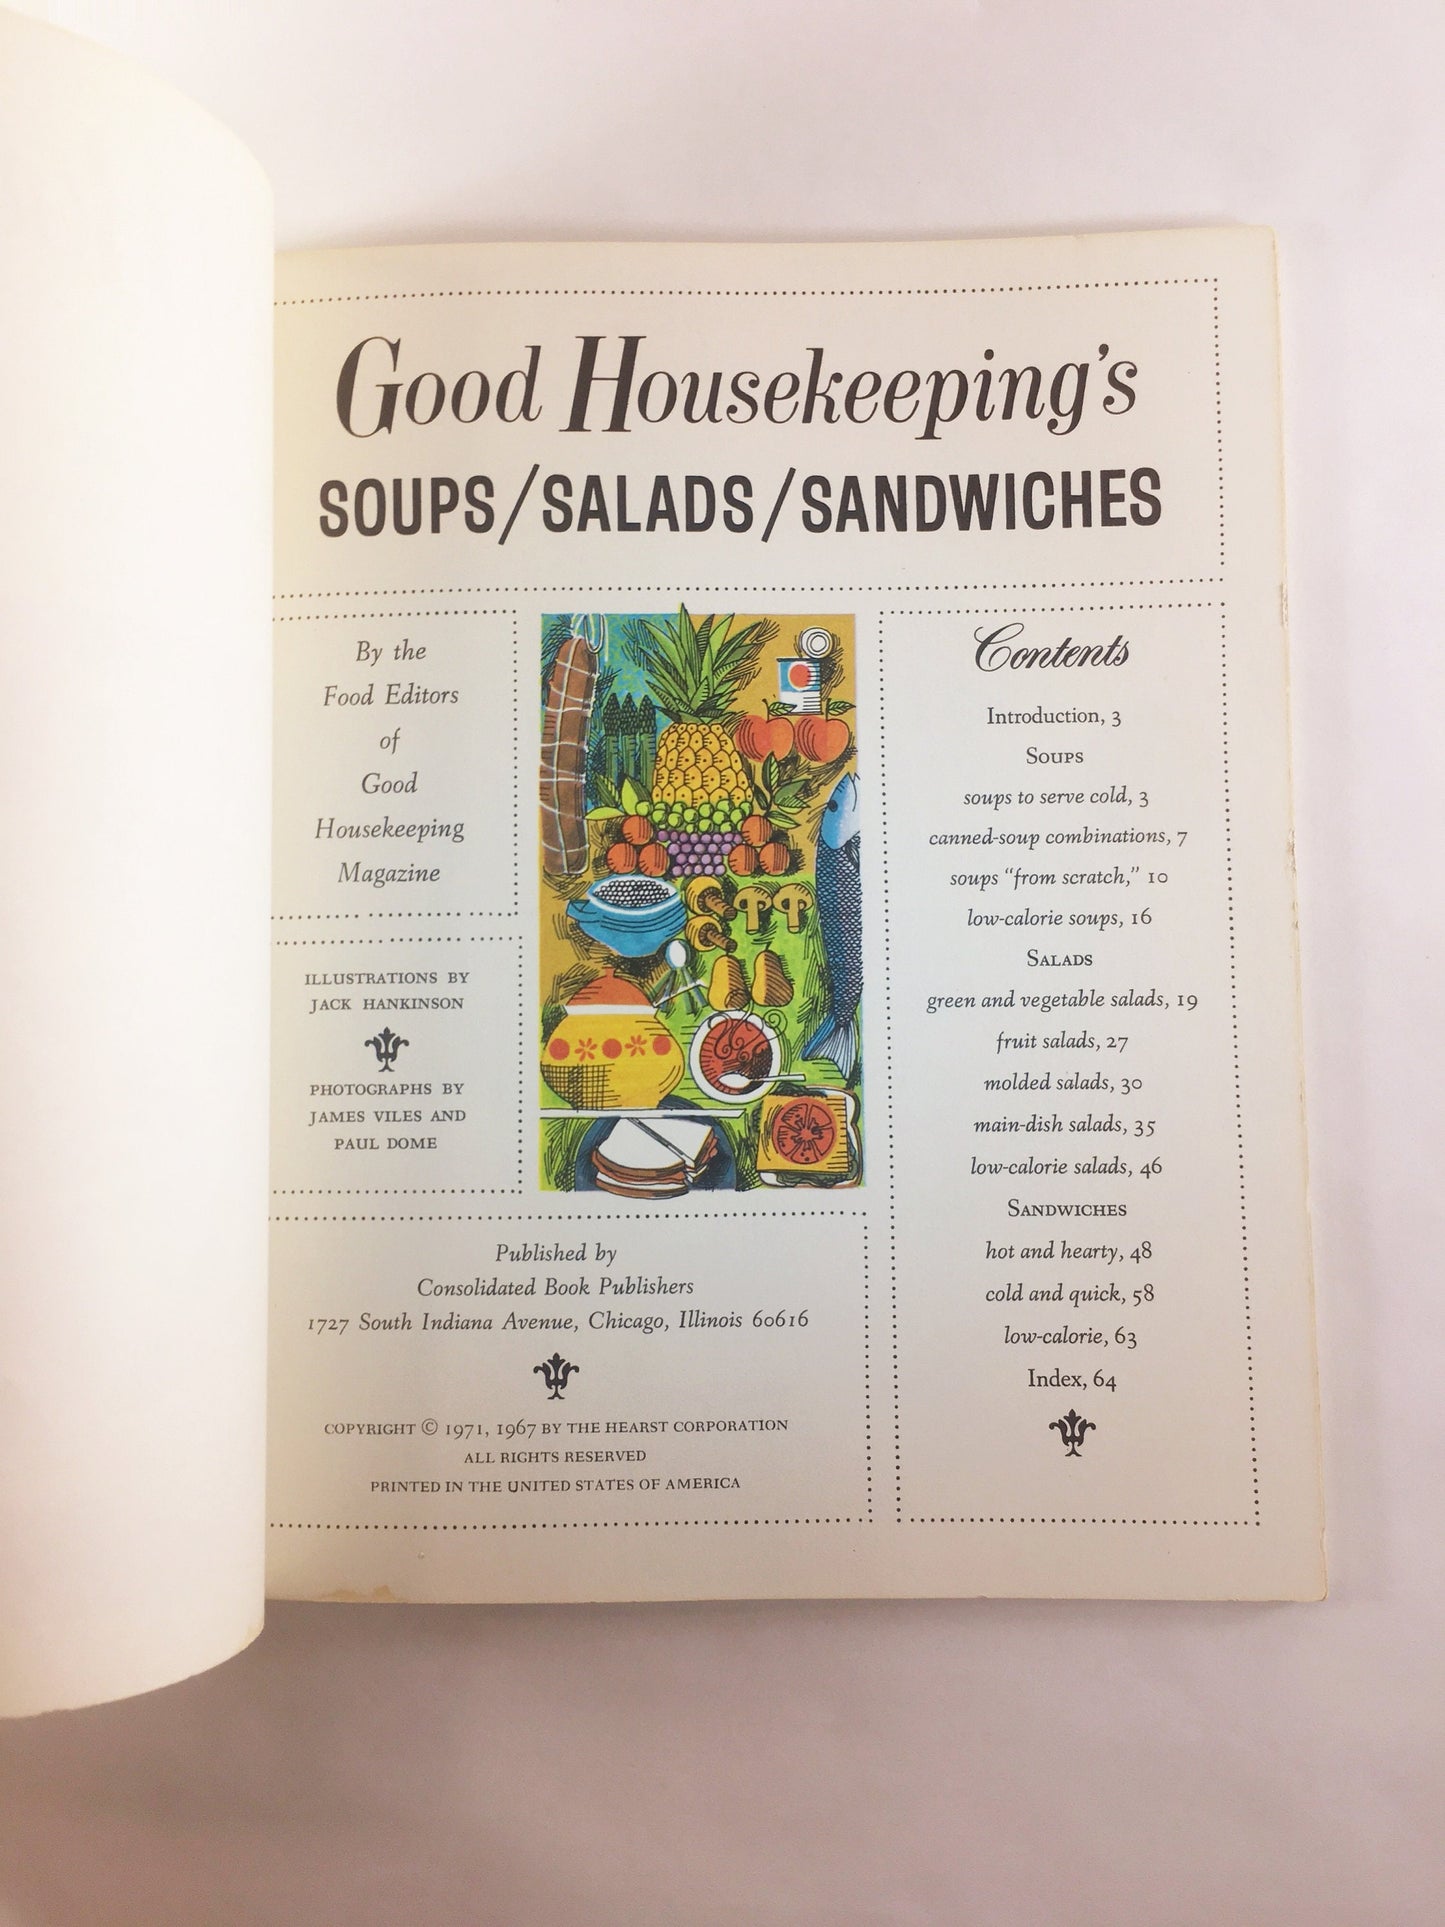 Good Housekeeping Cookbook circa 1971. Soups salads sandwiches Green vintage paperback book for easy kitchen recipes